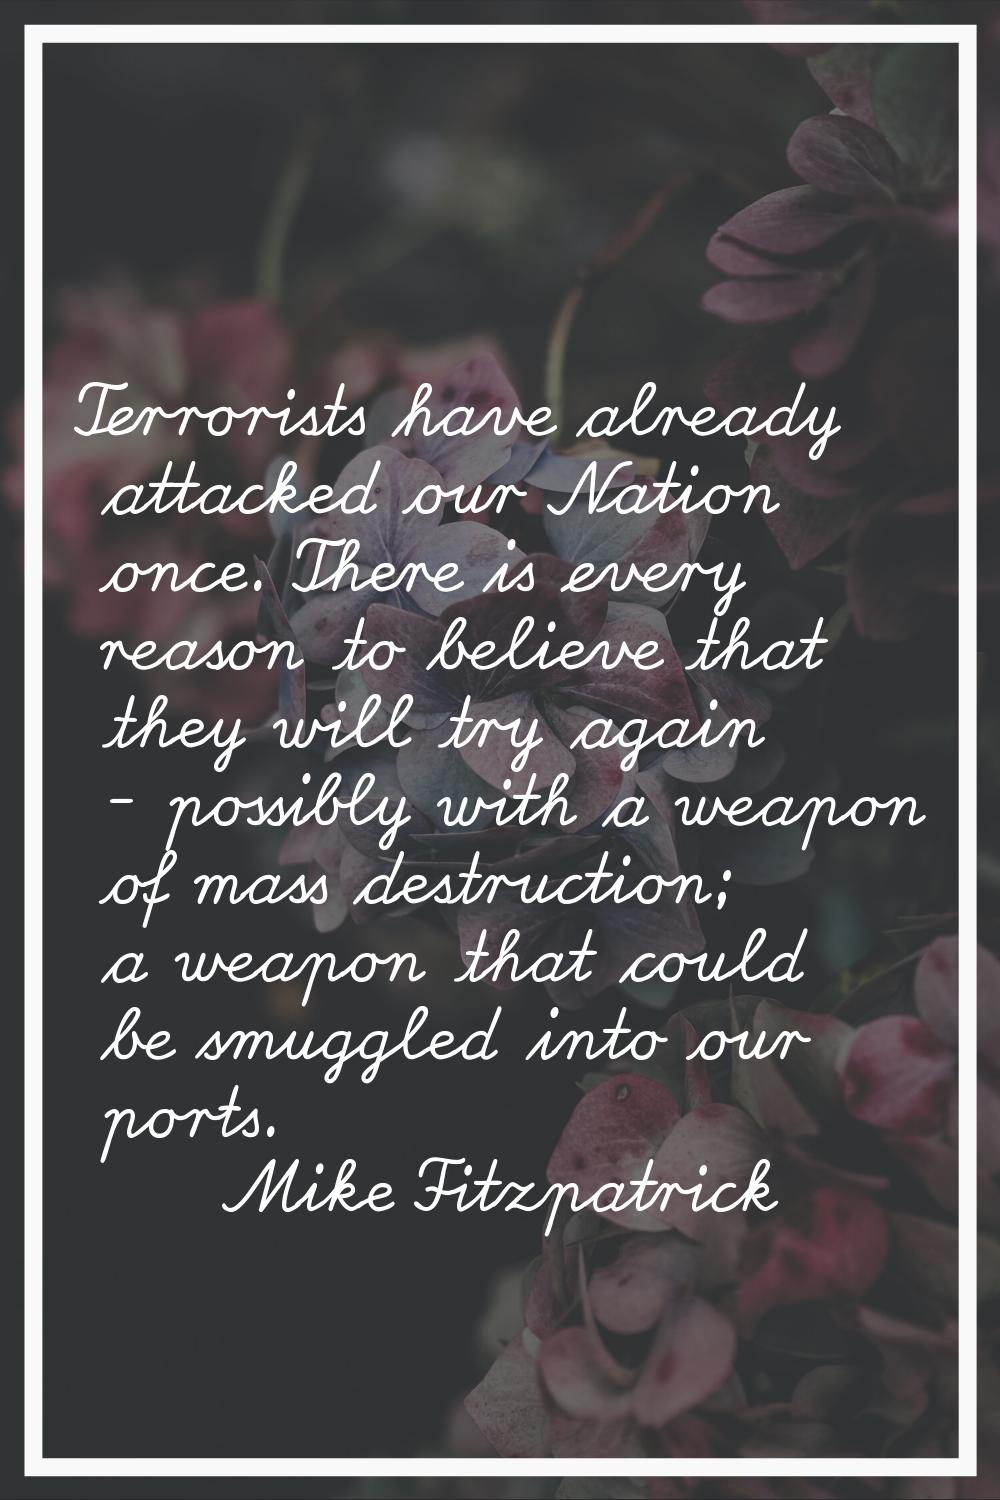 Terrorists have already attacked our Nation once. There is every reason to believe that they will t